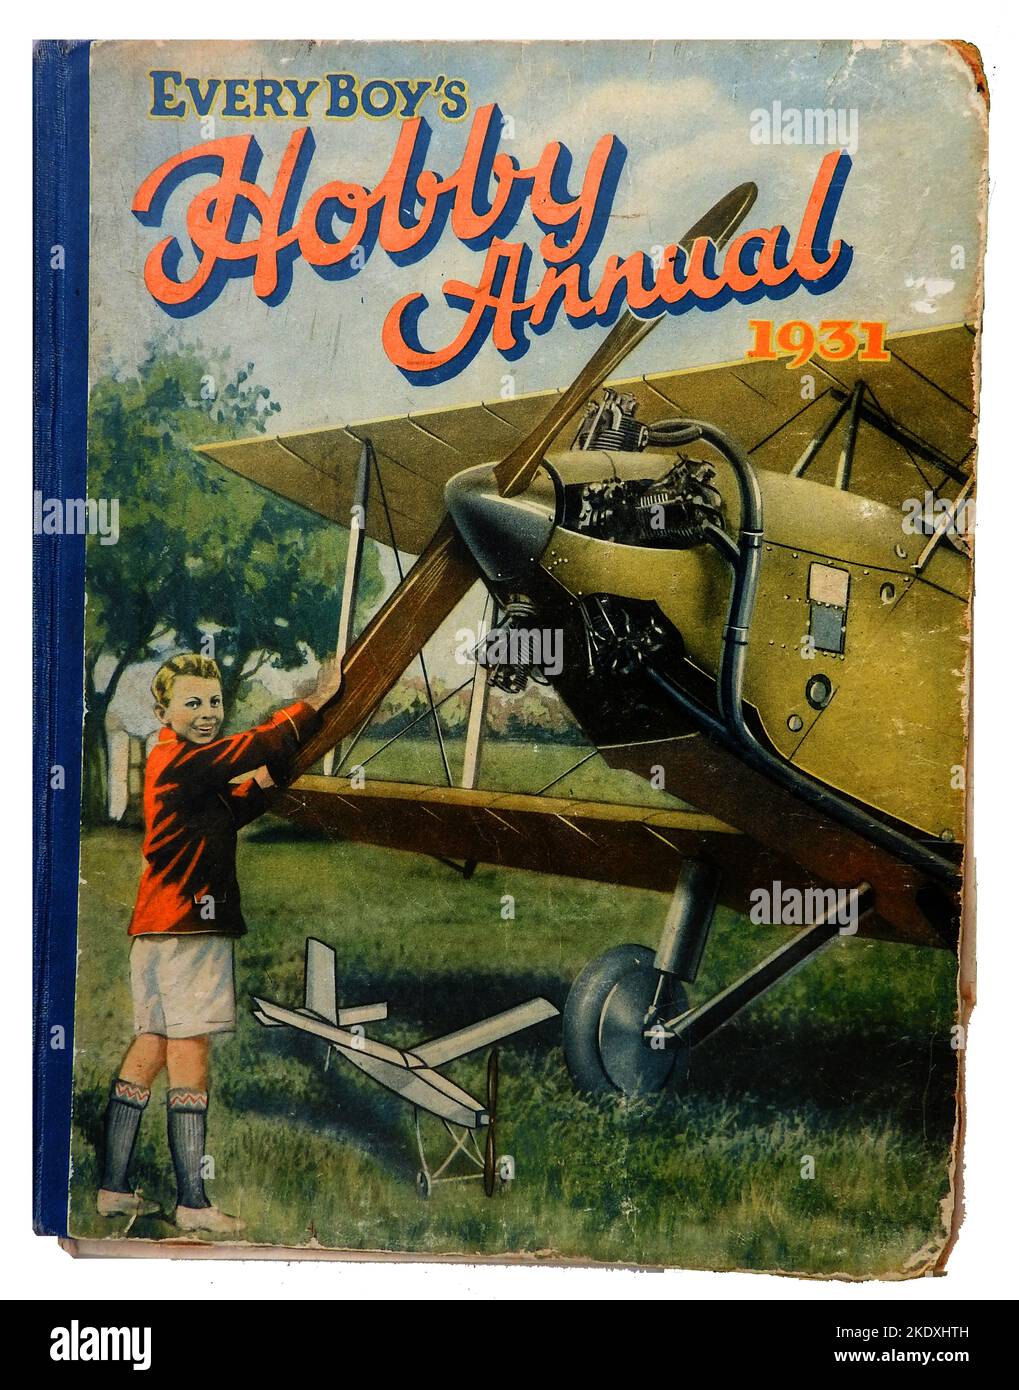 Cover of Every Boy's Hobby Annual 1932. This hard back  large format illustrated publication covered a wide range of subjects, treating boys as young men with adult interests such as aircraft, scientific experiments, railways etc. Boys were treated as adults and were taught how to experiment with chemicals, build boats , wireless sets and  engage in other activities that would never find their way into modern children's literature because of health and safety issues. Stock Photo